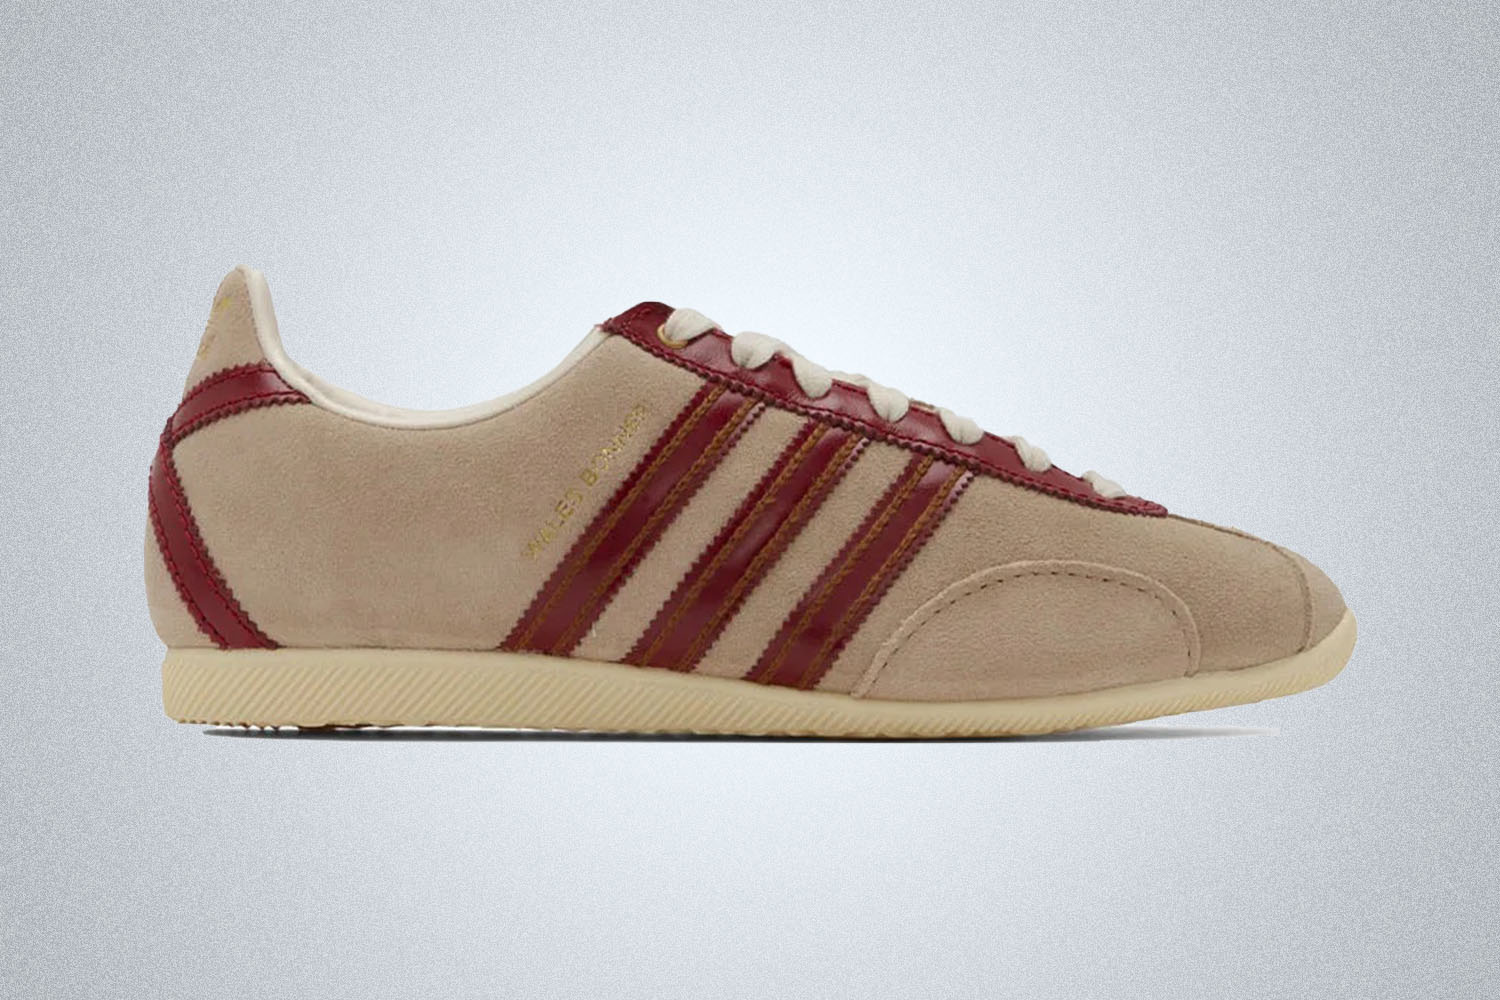 a pair of beige and maroon Adidas x WB sneakers on a grey background